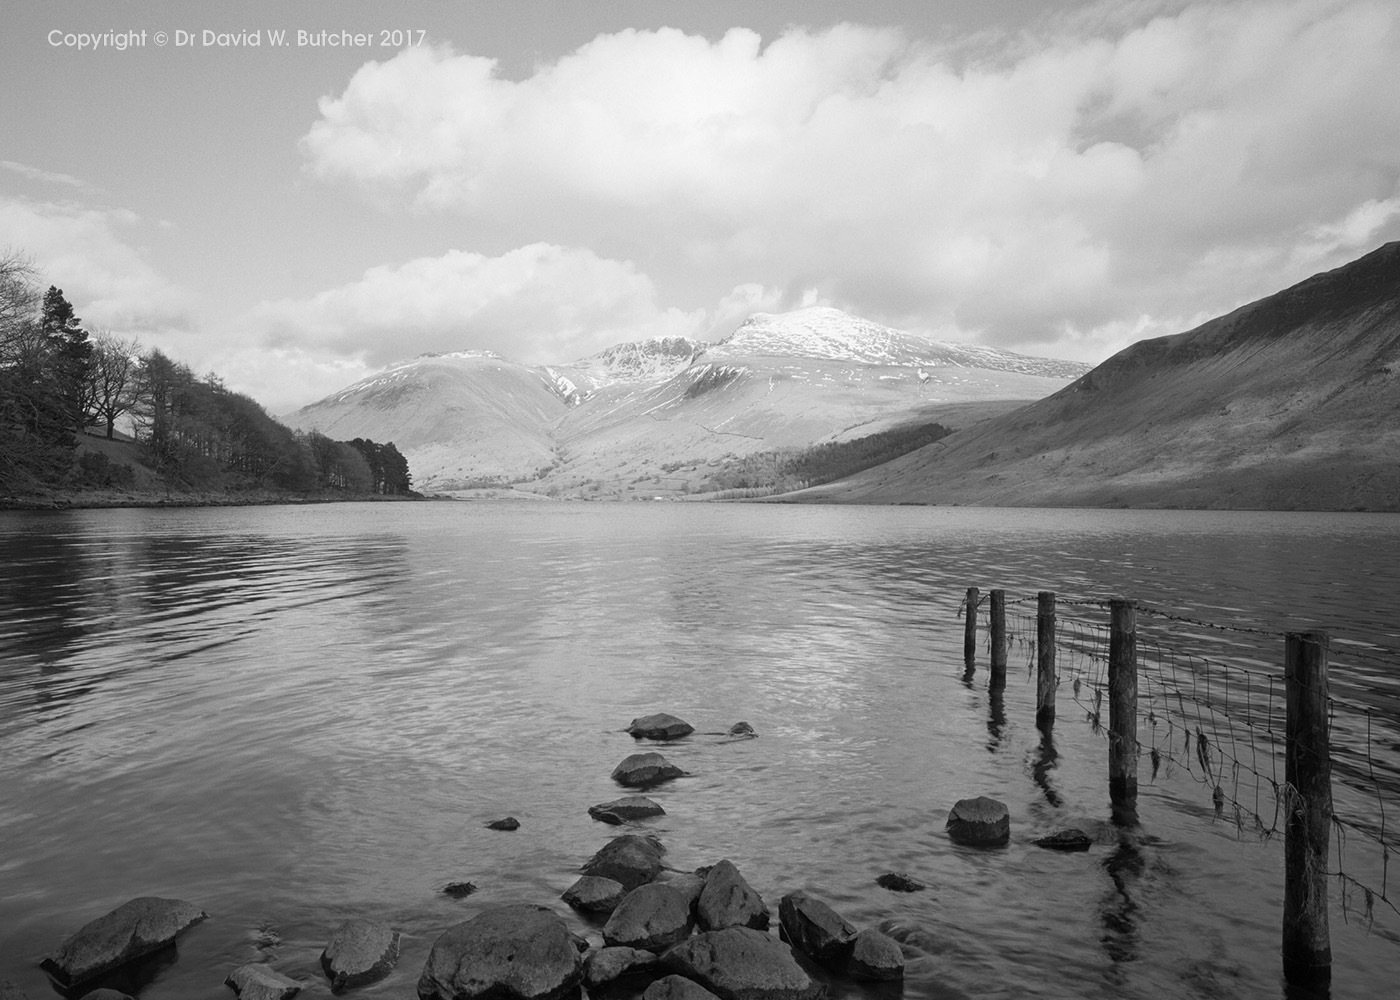 Scafell Pike and Wast Water #3, Wasdale, Lake District